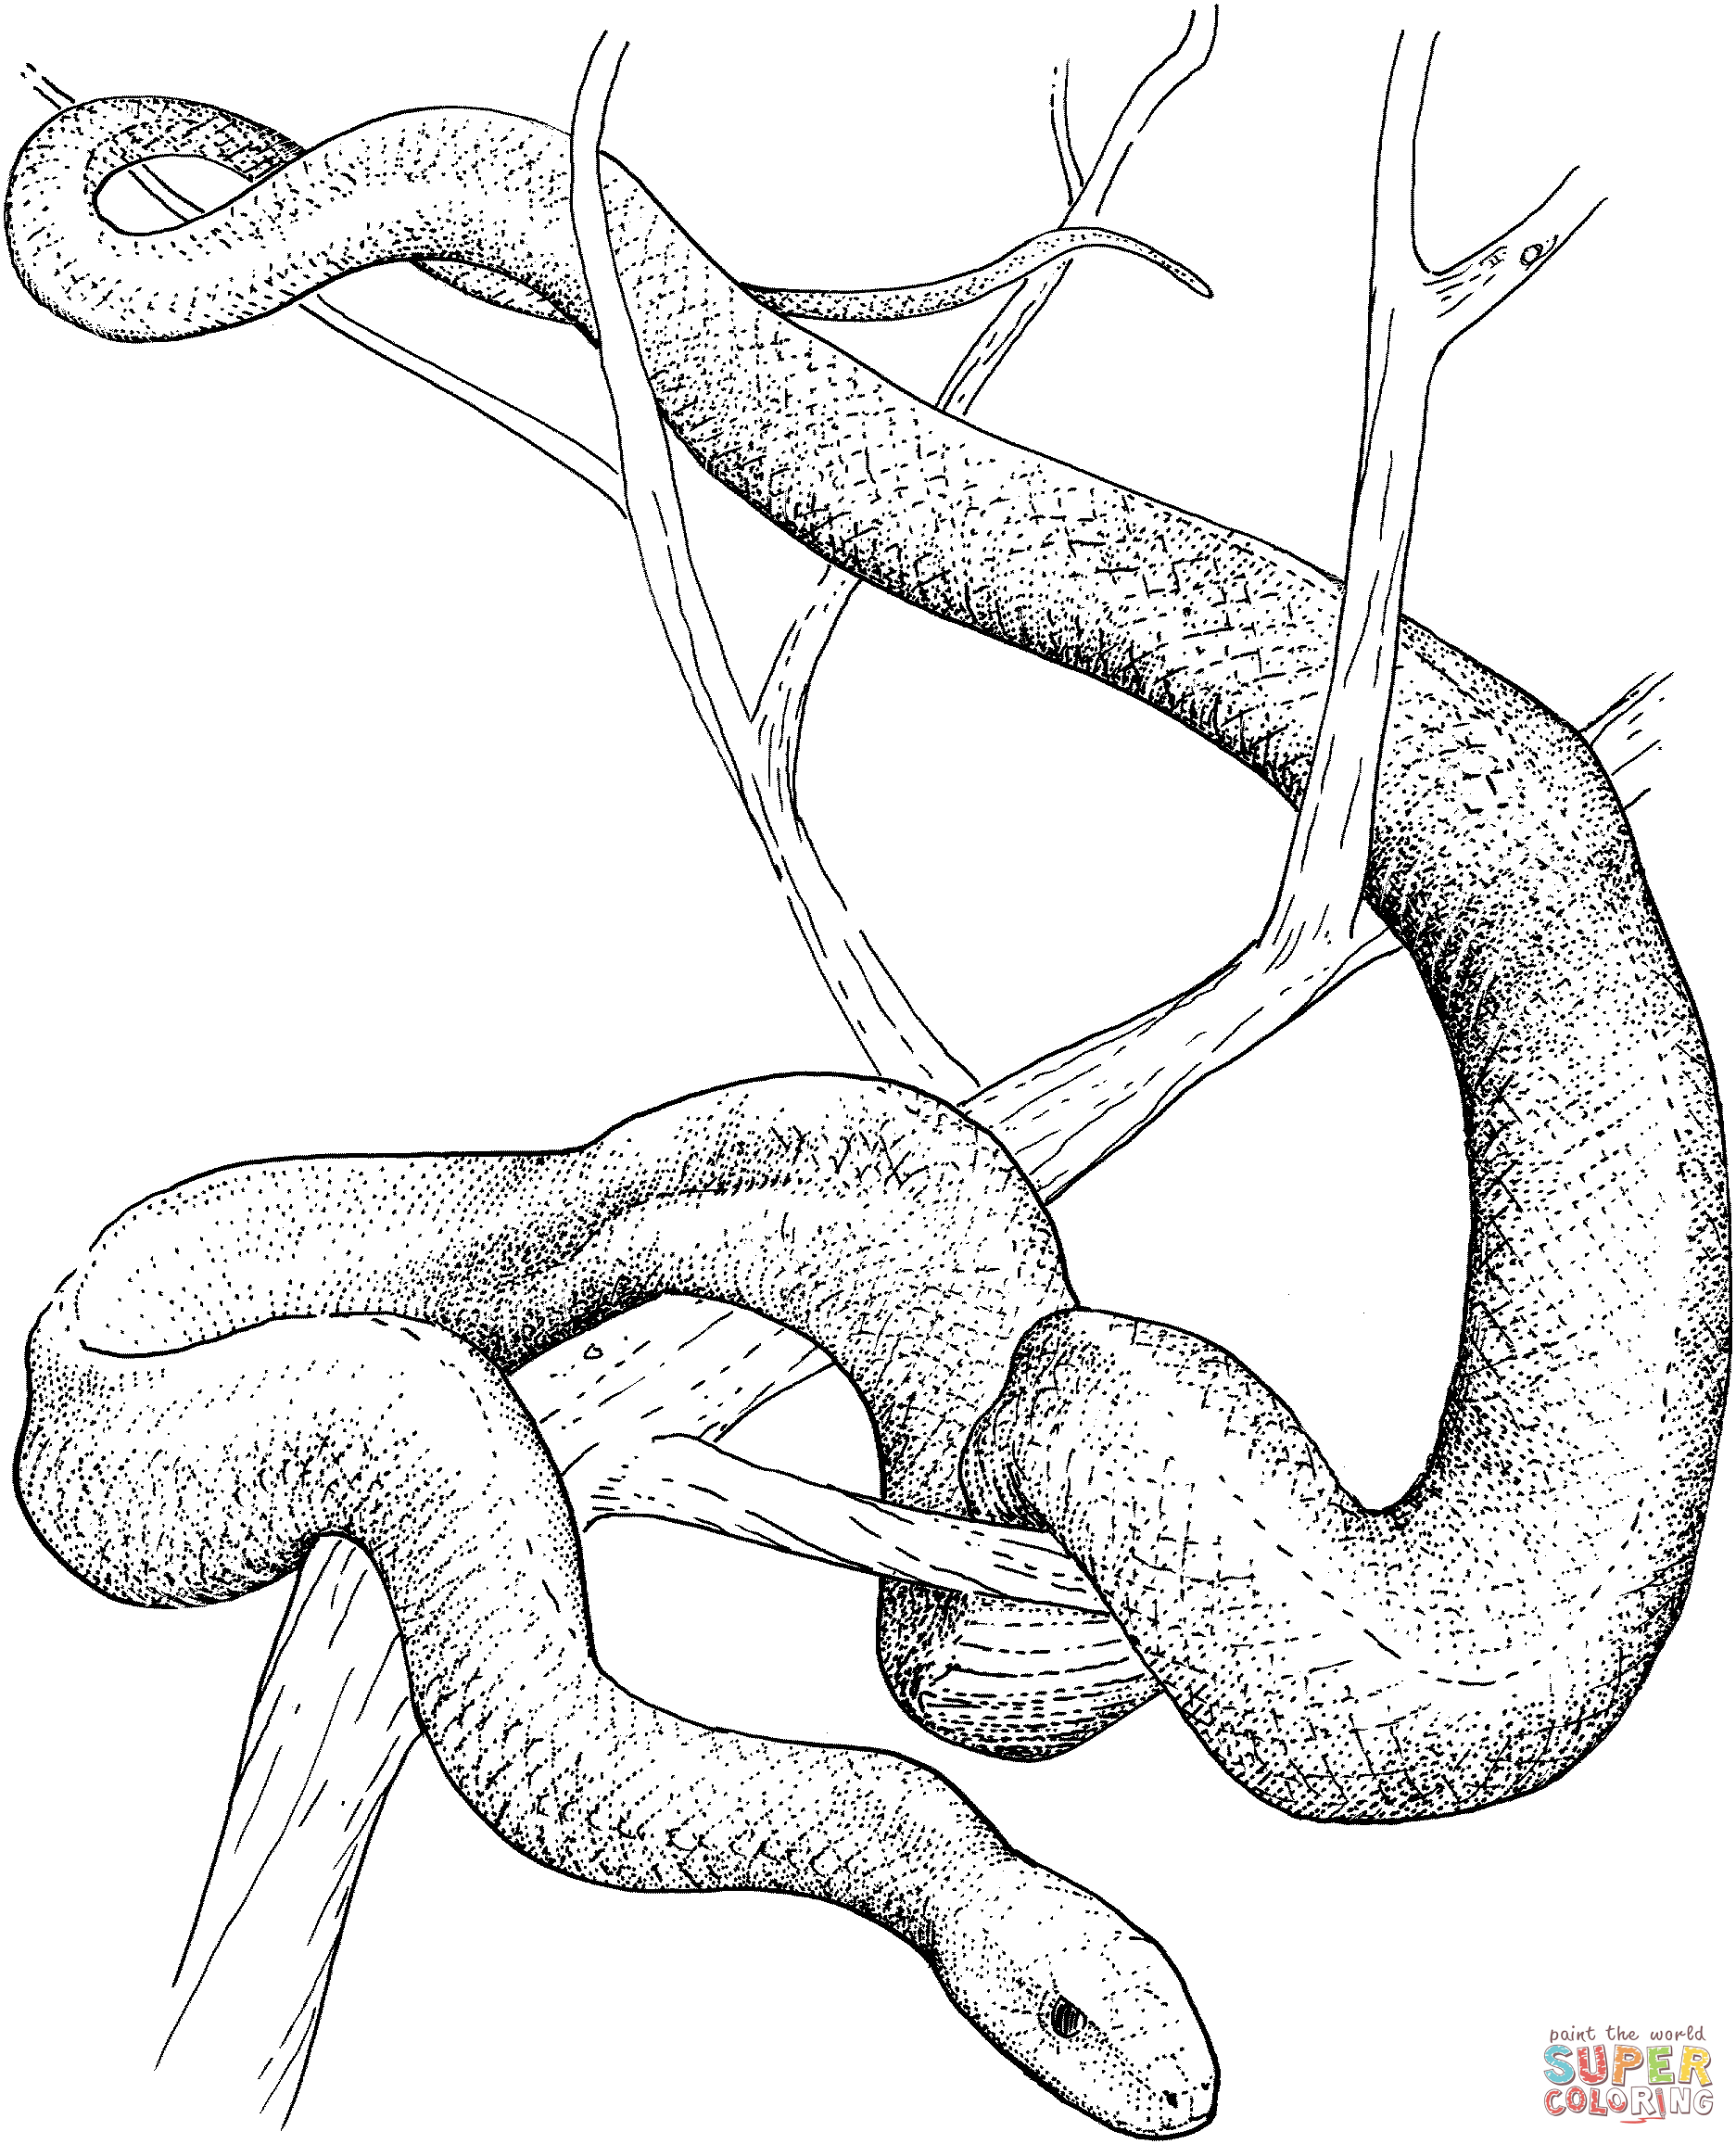 Realistic Snakes Coloring Pages Free Coloring Pages Coloring Home